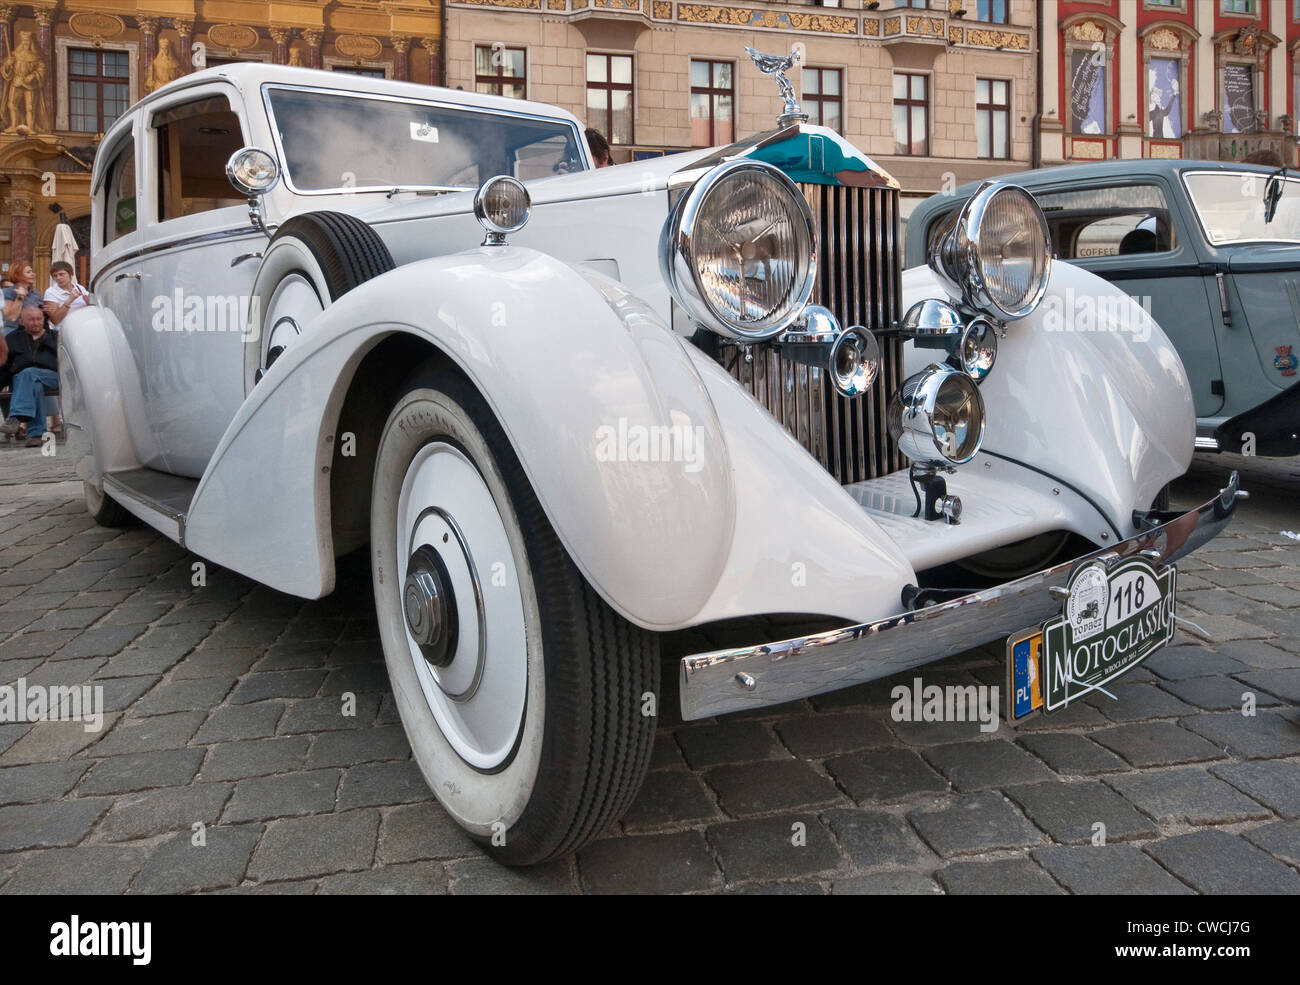 1930s Rolls Royce 20/25 at Motoclassic car show at Rynek (Market Square) in Wroclaw, Lower Silesia, Poland Stock Photo